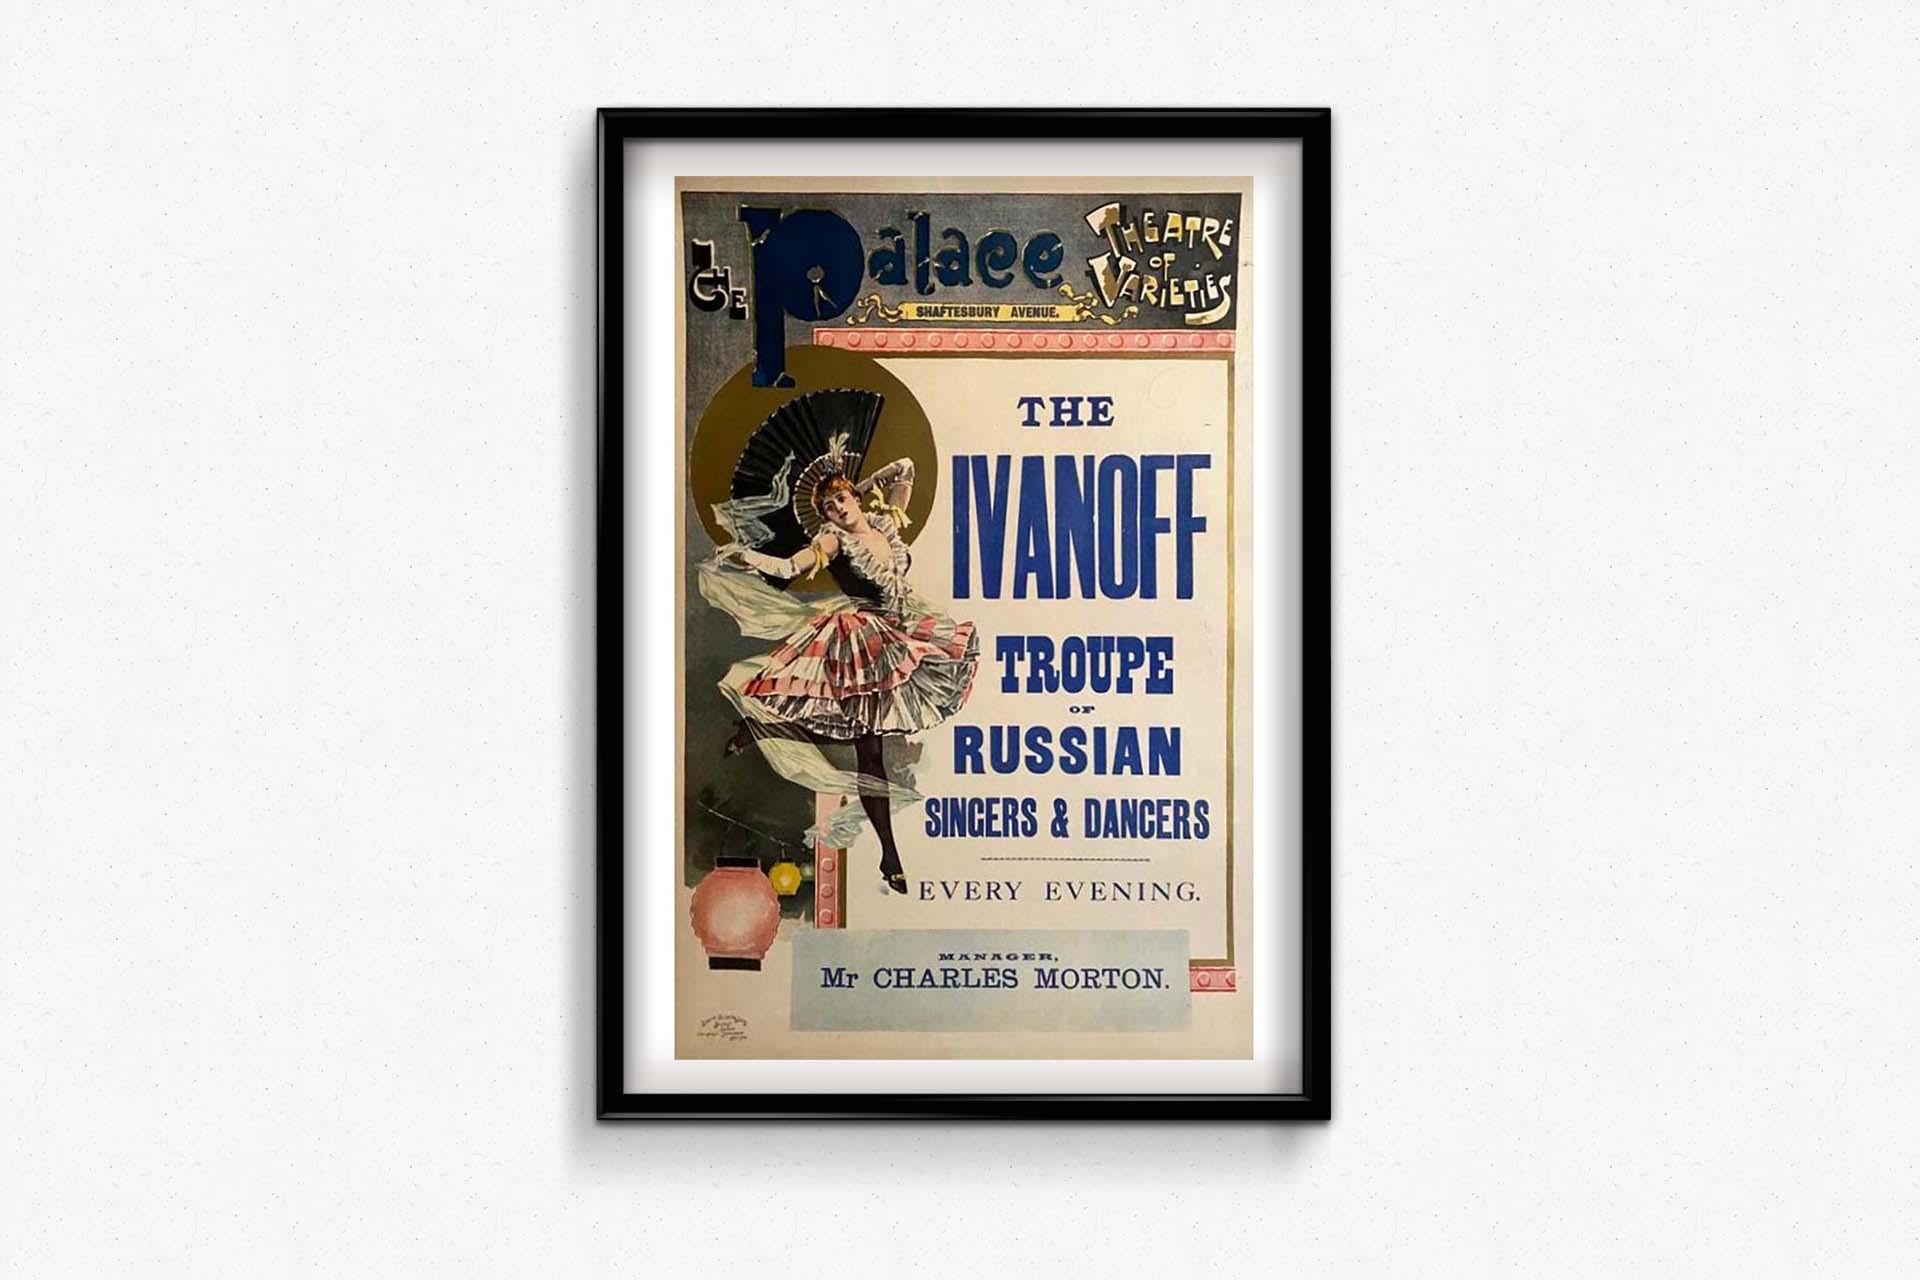 Crafted around the turn of the 20th century, the original poster advertising 